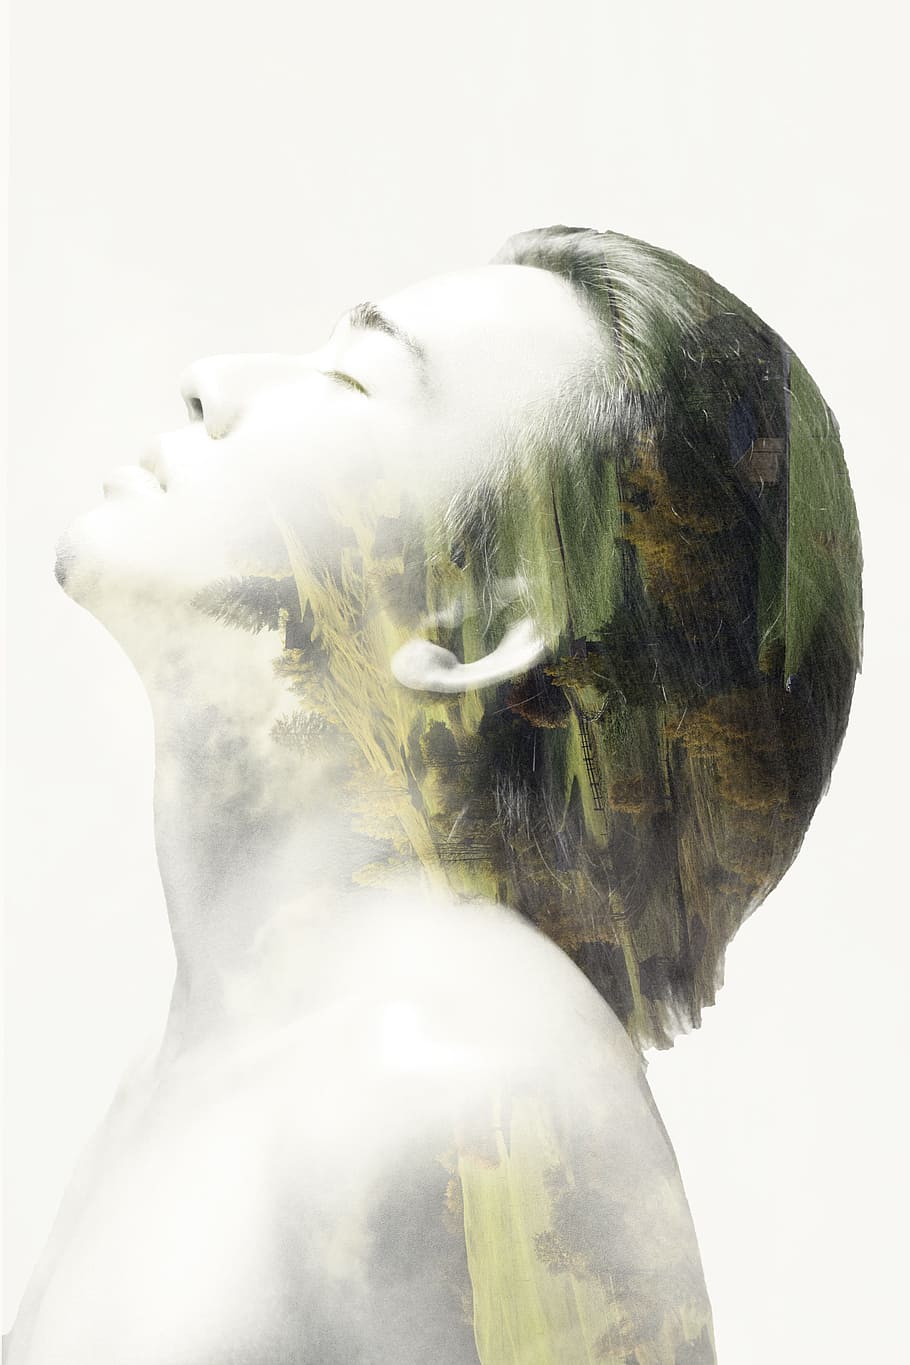 Double Exposure, Photographing, Contact, human, exposure, tree, photoshop, design, one woman only, human face